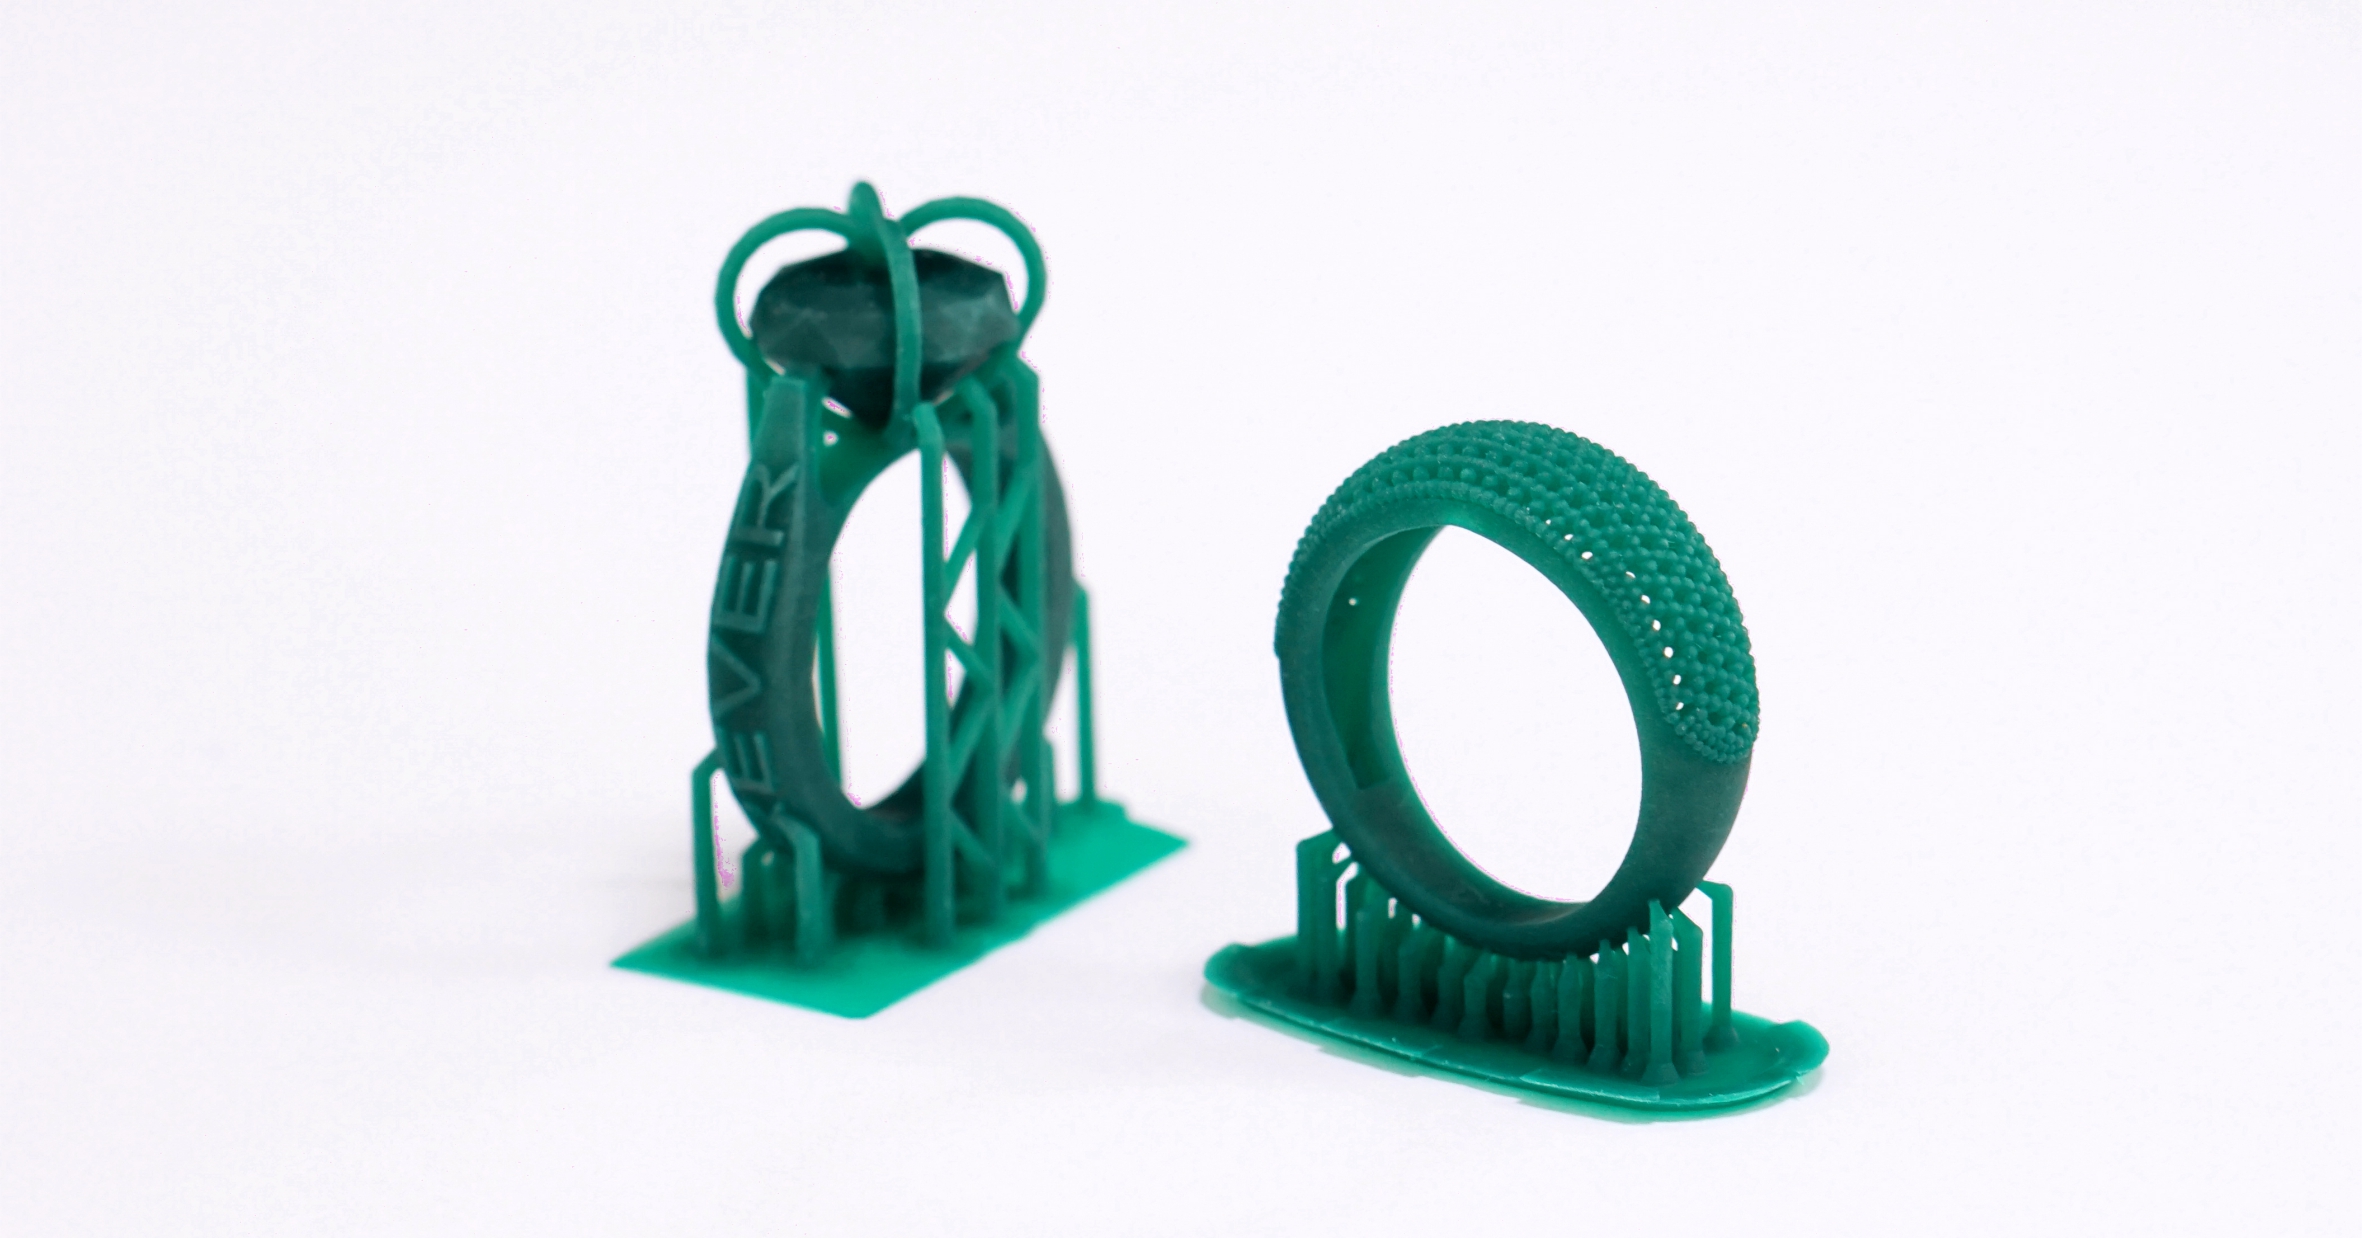 Application of professional 3D printers in jewelry